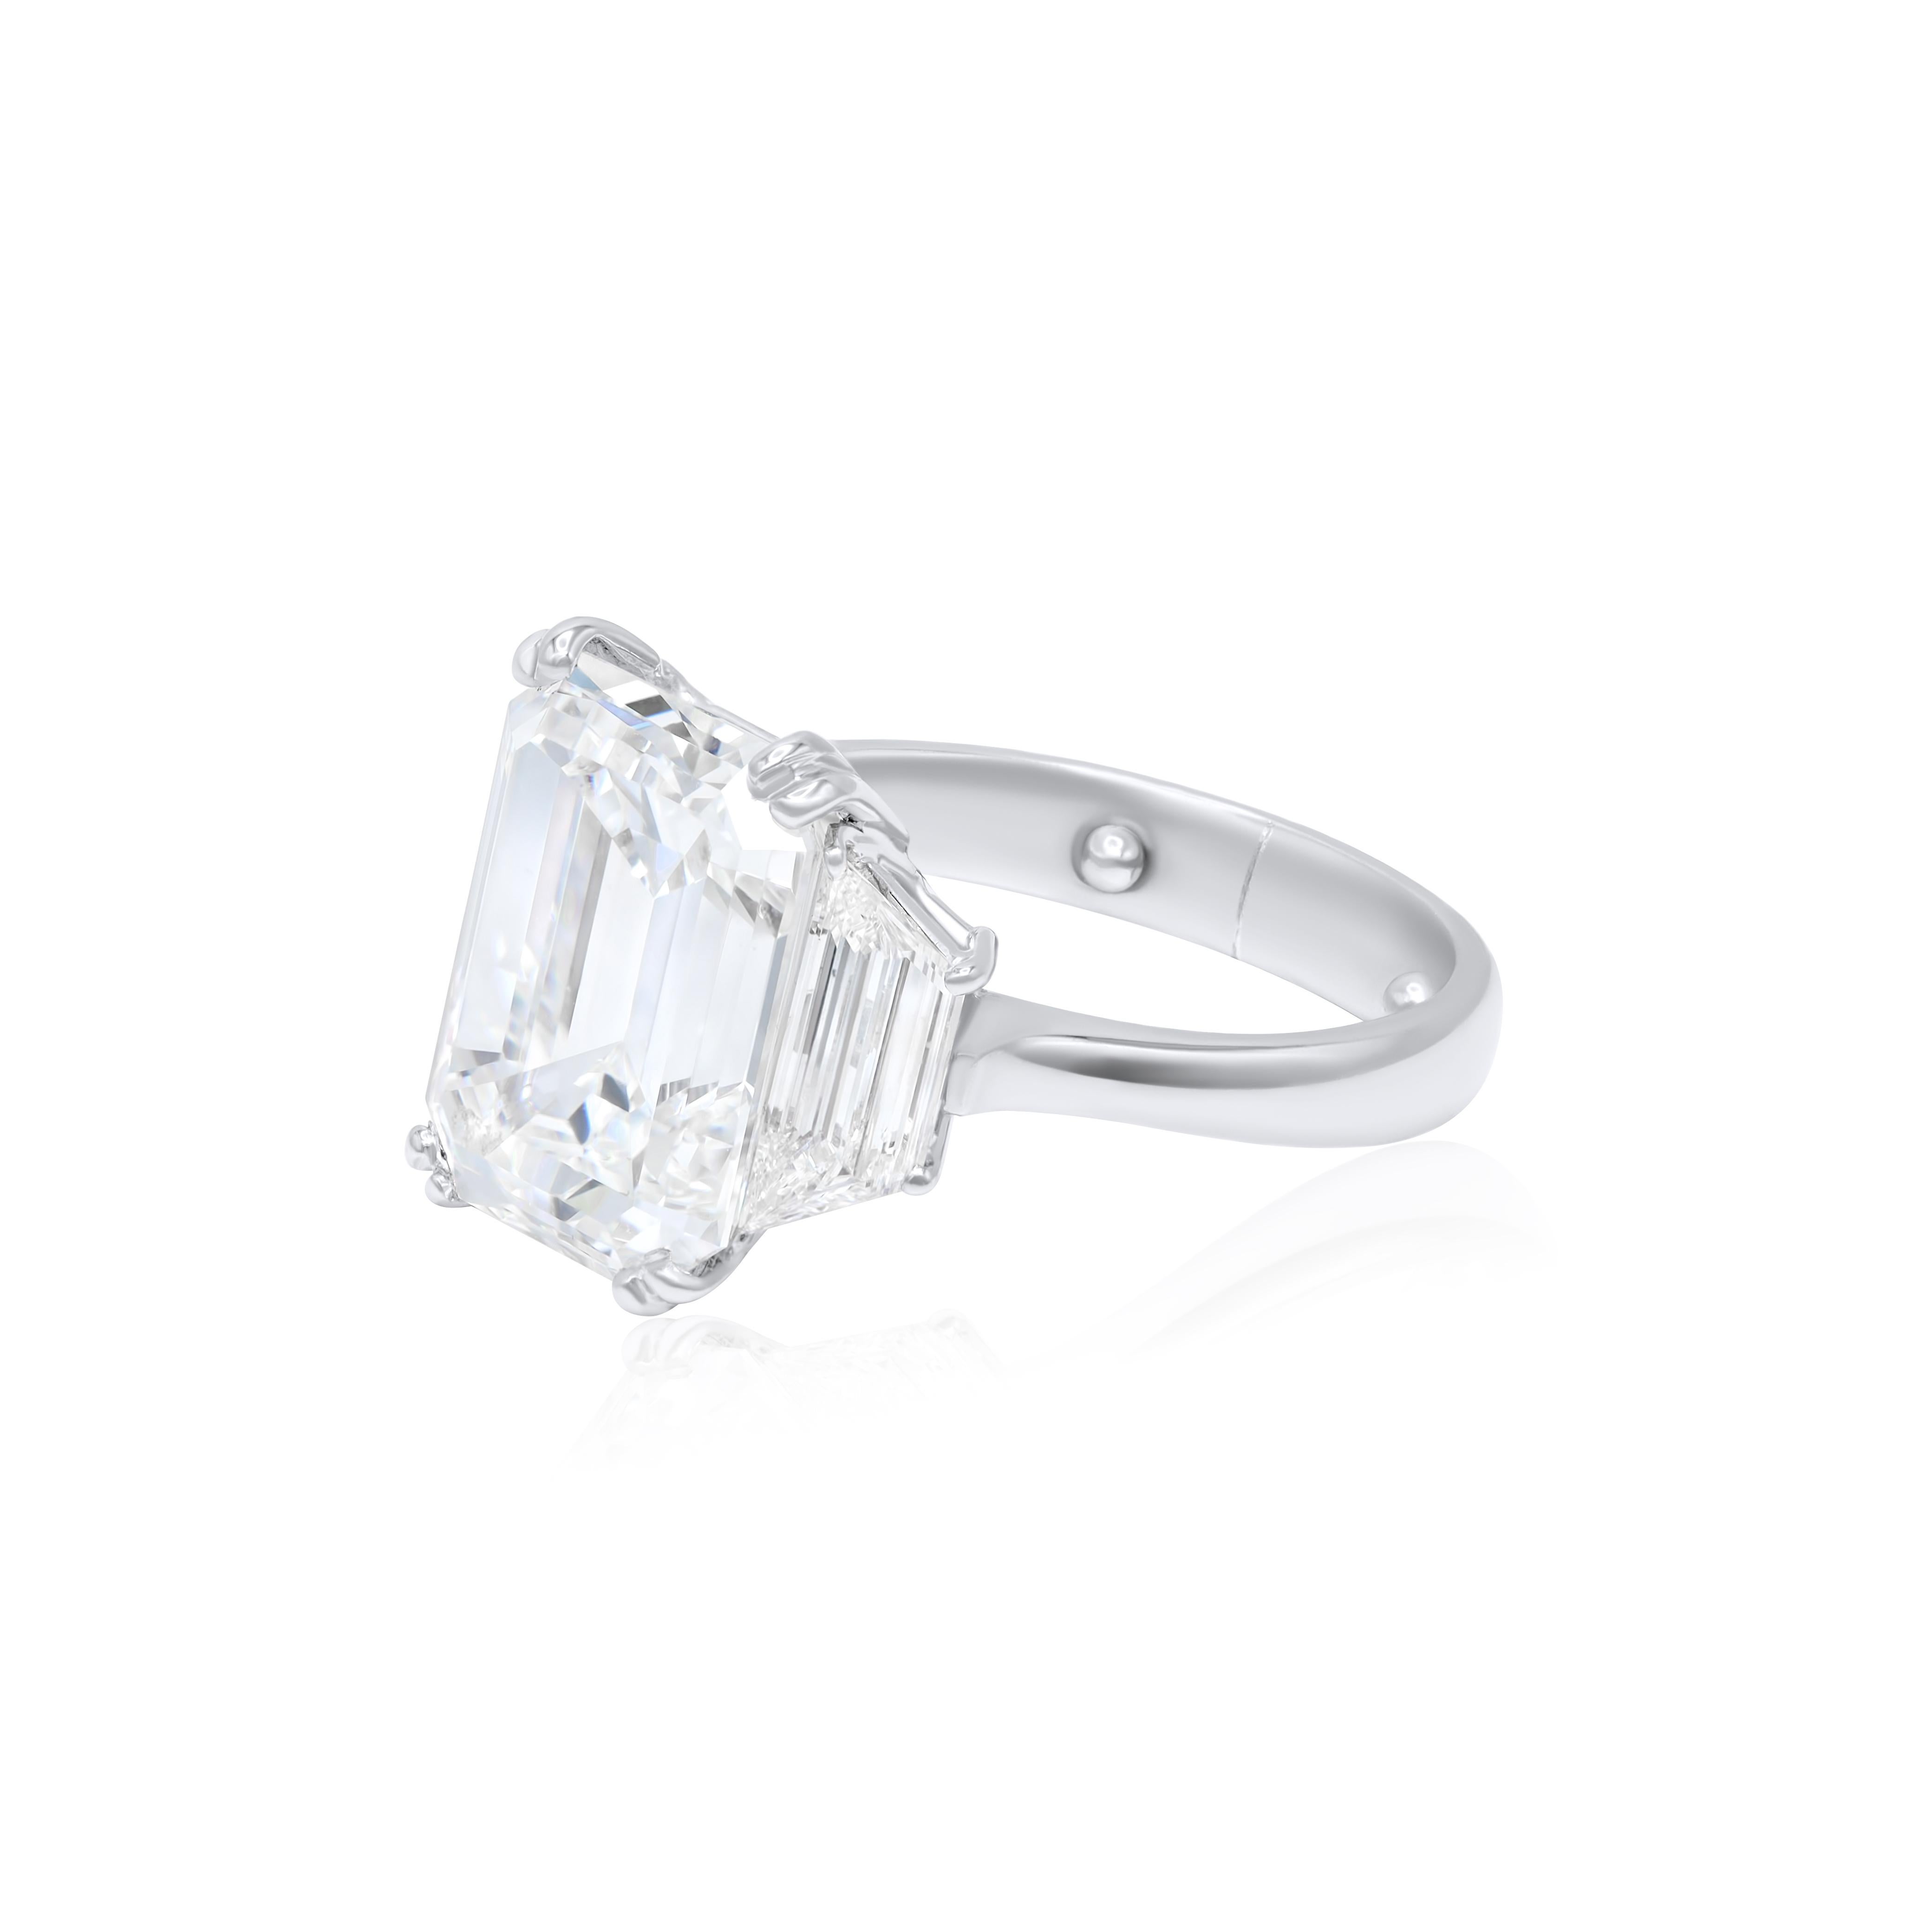 Platinum engagement ring featuring a center 8.08 ct emerald cut diamond(GIA #11042690) (E-VVS2) with 2.01 cts tw of trapezoids on the sides 
Diana M is one-stop shop for all your jewelry shopping, carrying line of diamond rings, earrings, bracelets,